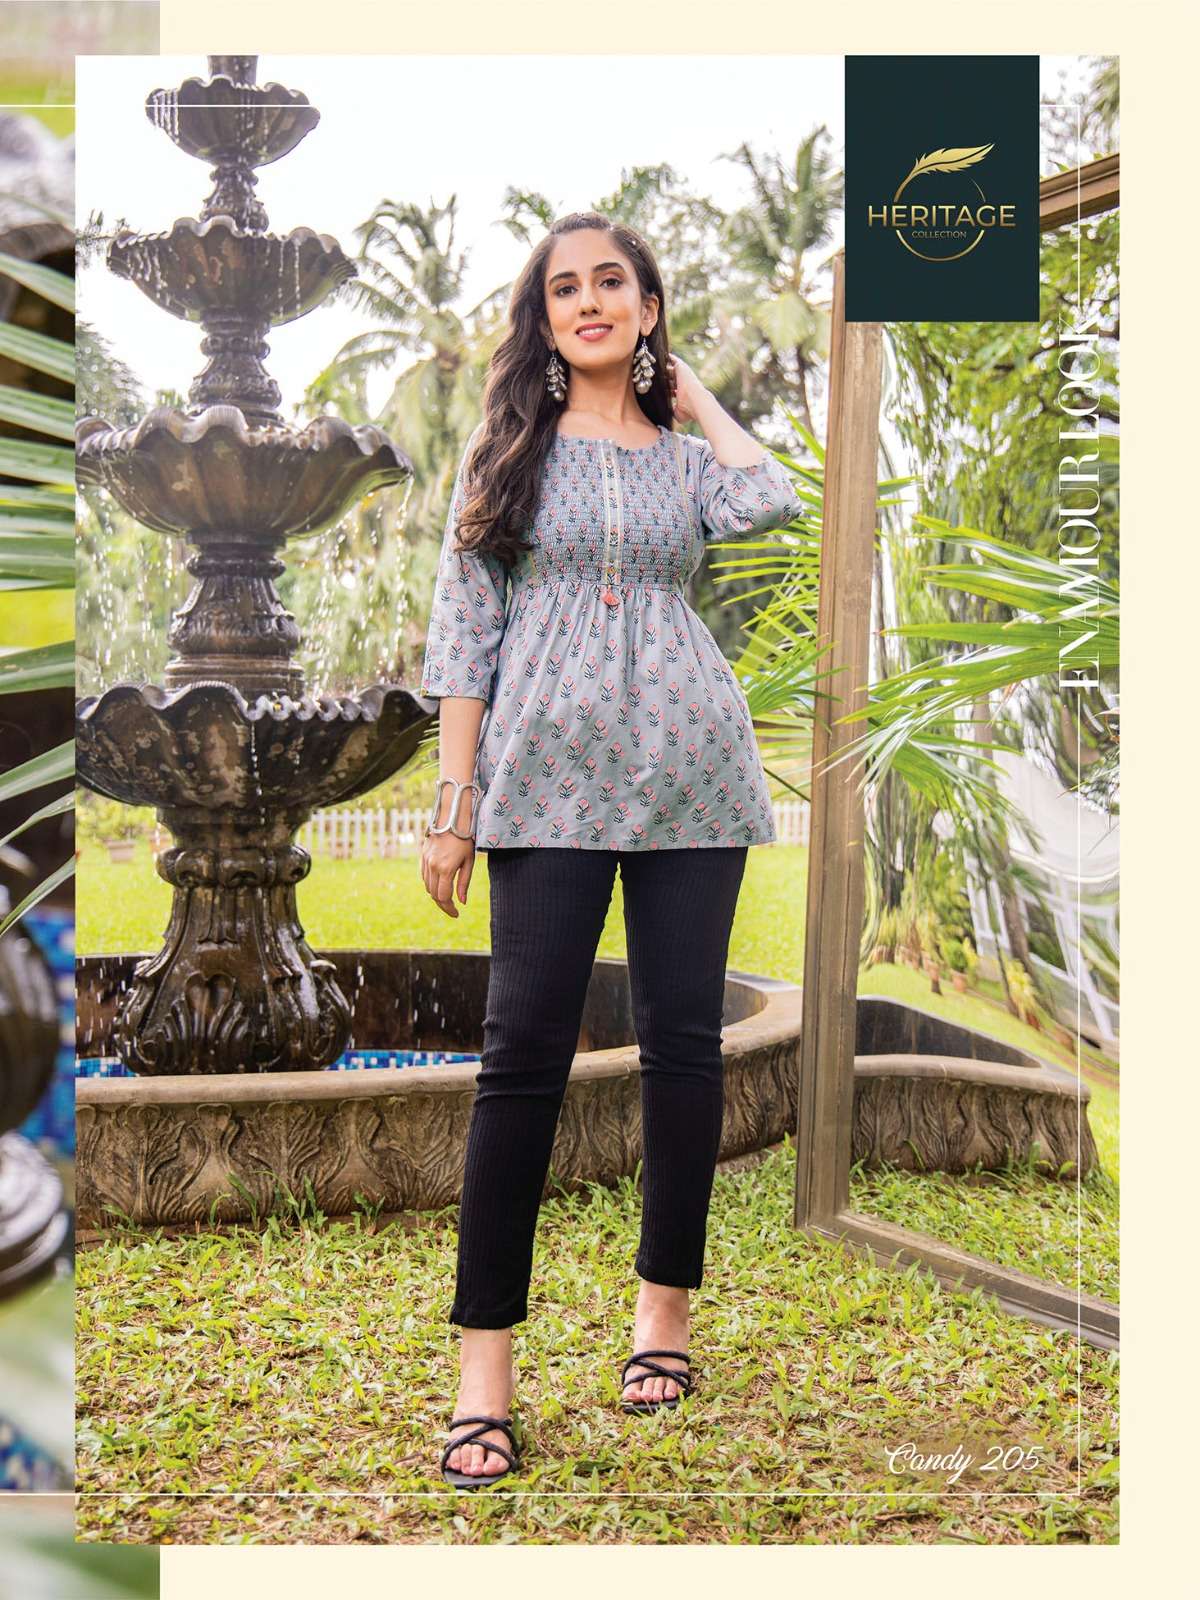 HERITAGE COLLECTION CANDY Kurti Wholesale catalog